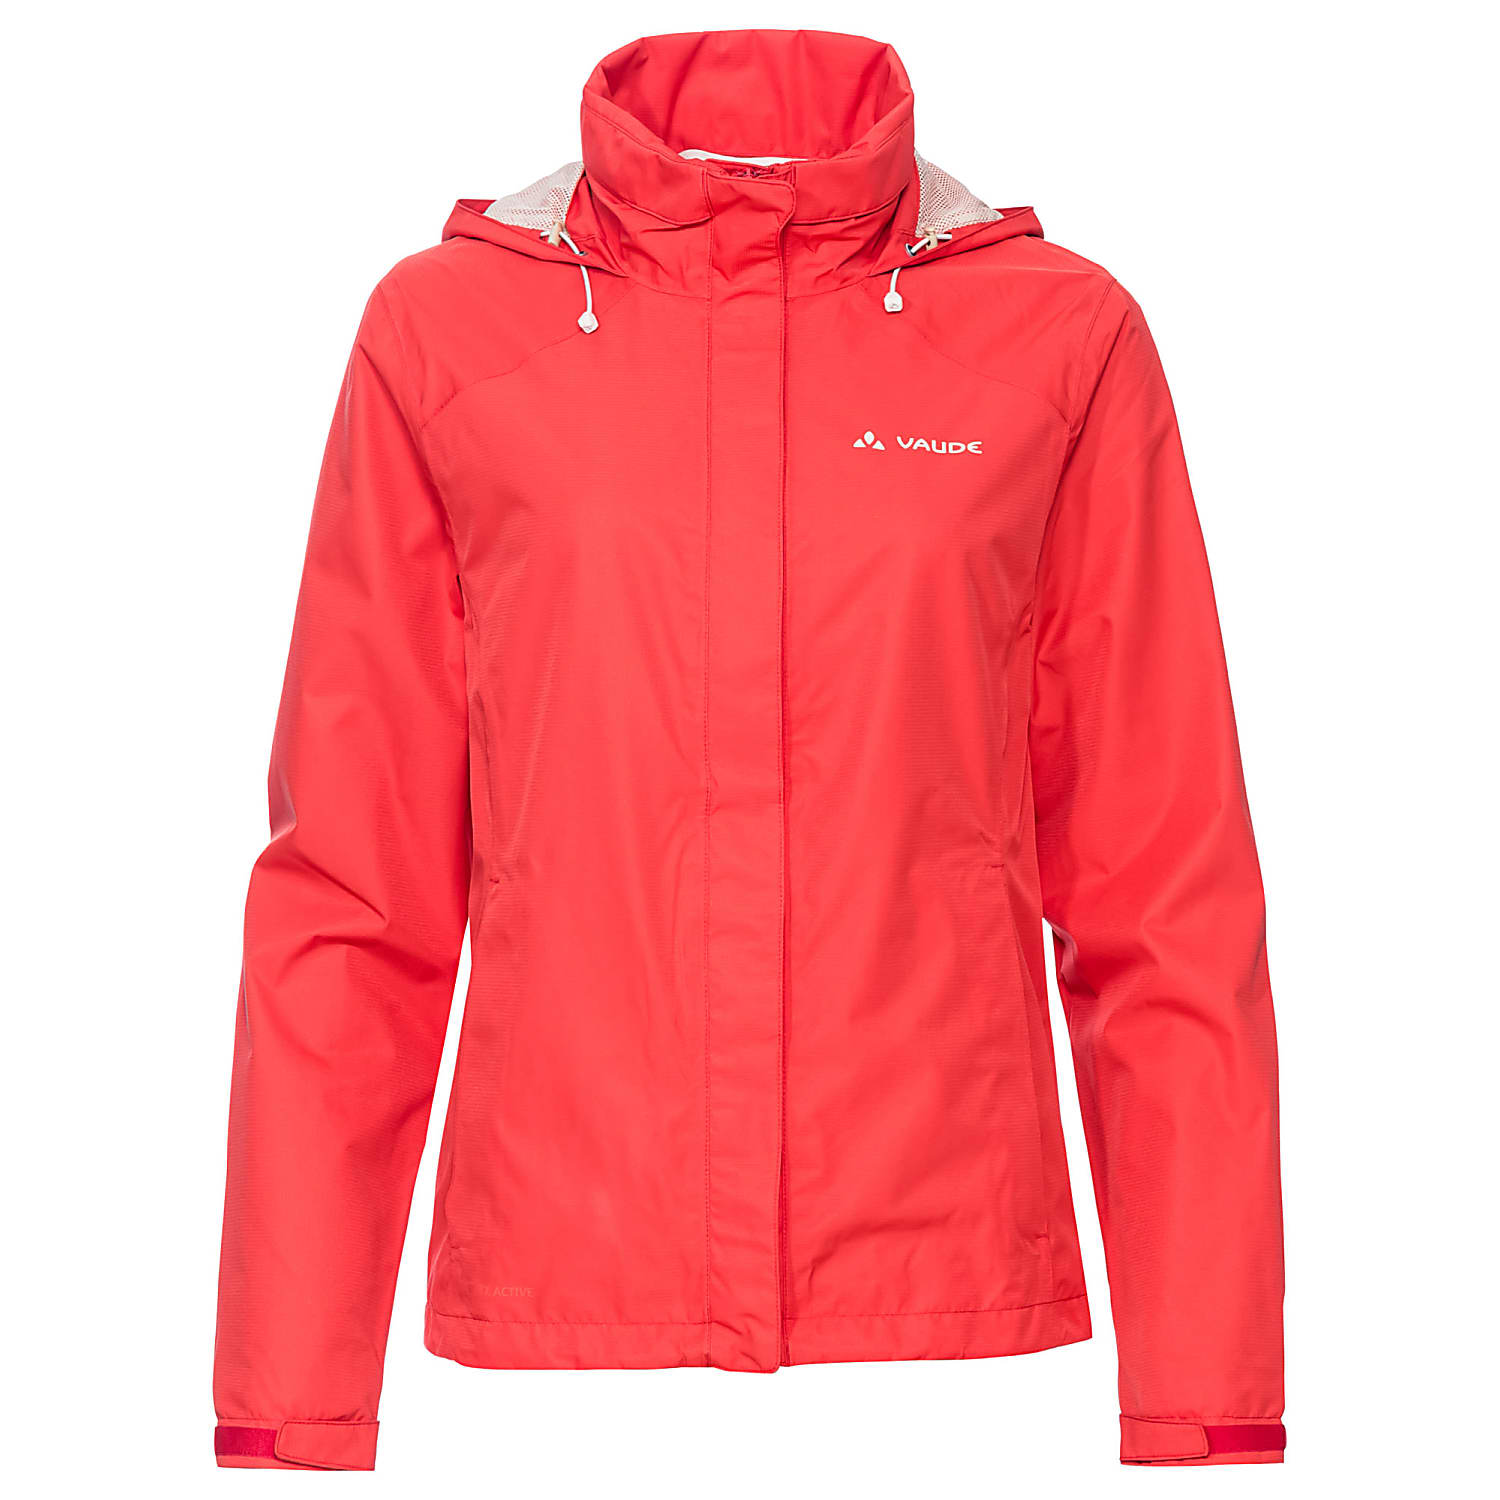 Vaude WOMENS ESCAPE BIKE LIGHT JACKET, Flame - Fast and cheap shipping